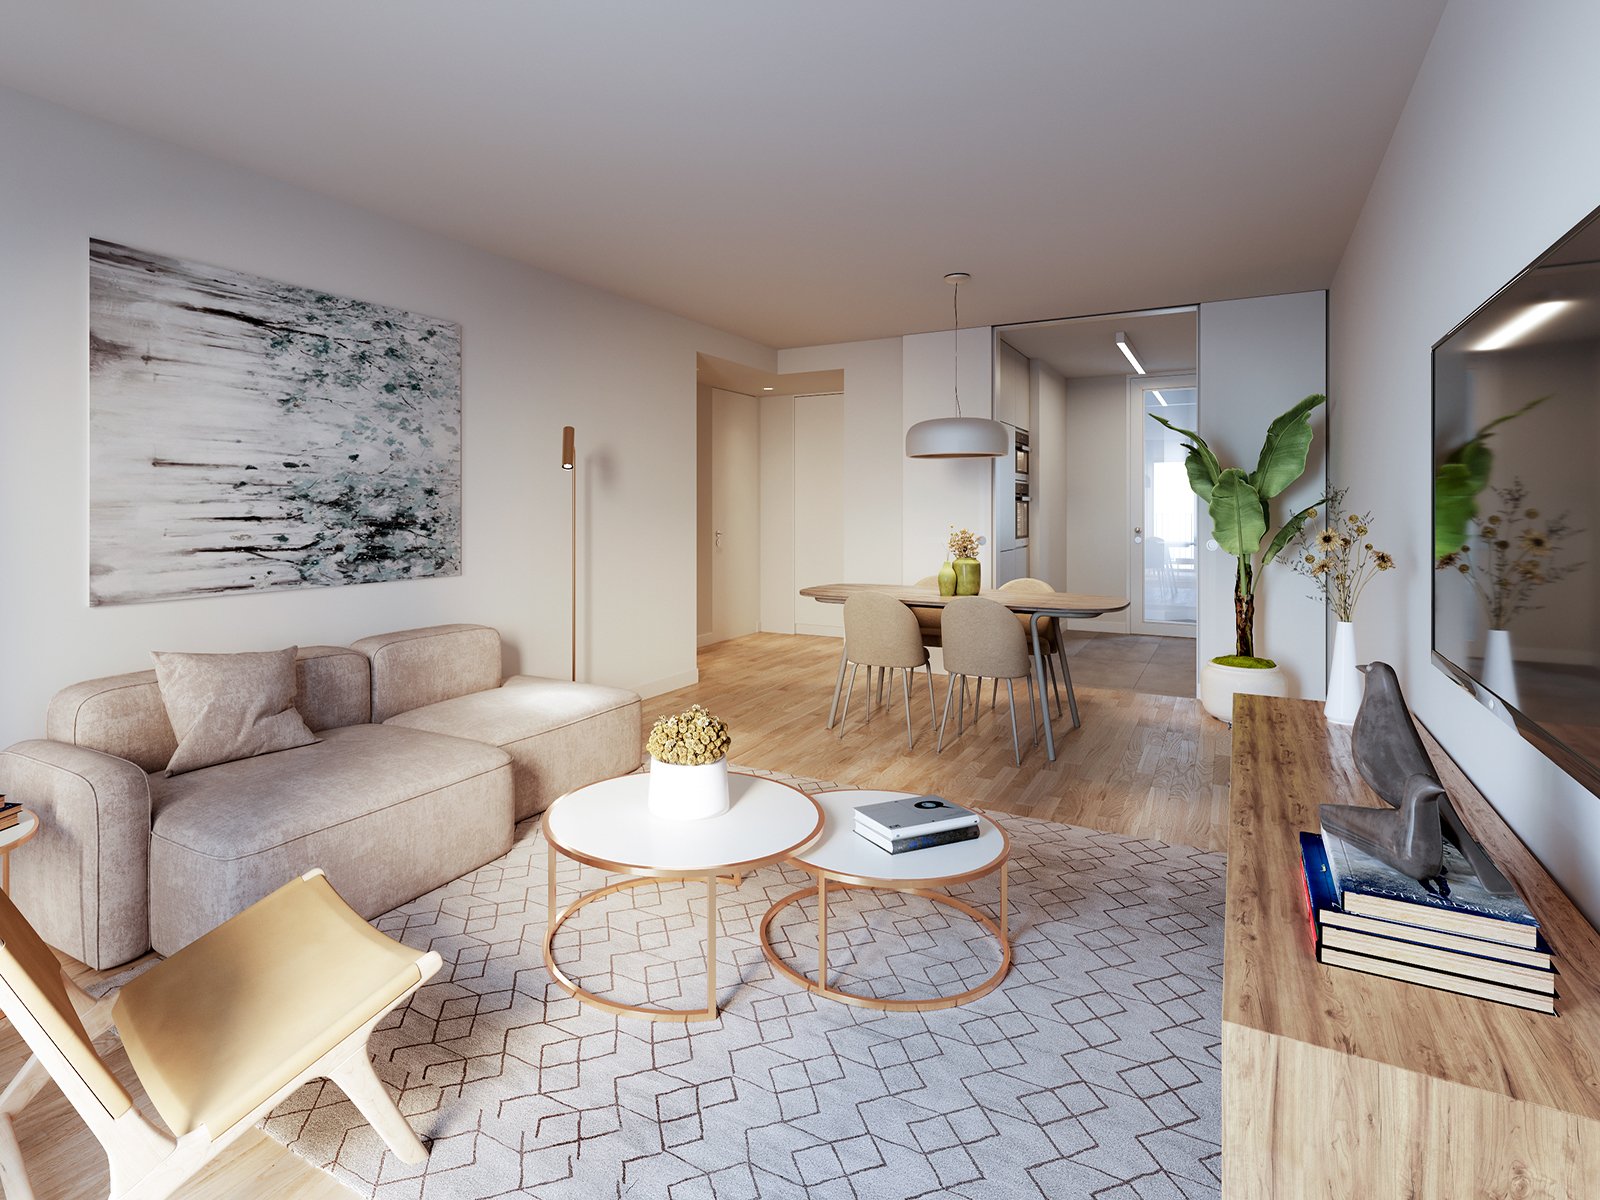 2 bedroom apartment with balcony and parking in new development, Lisbon 3292650681